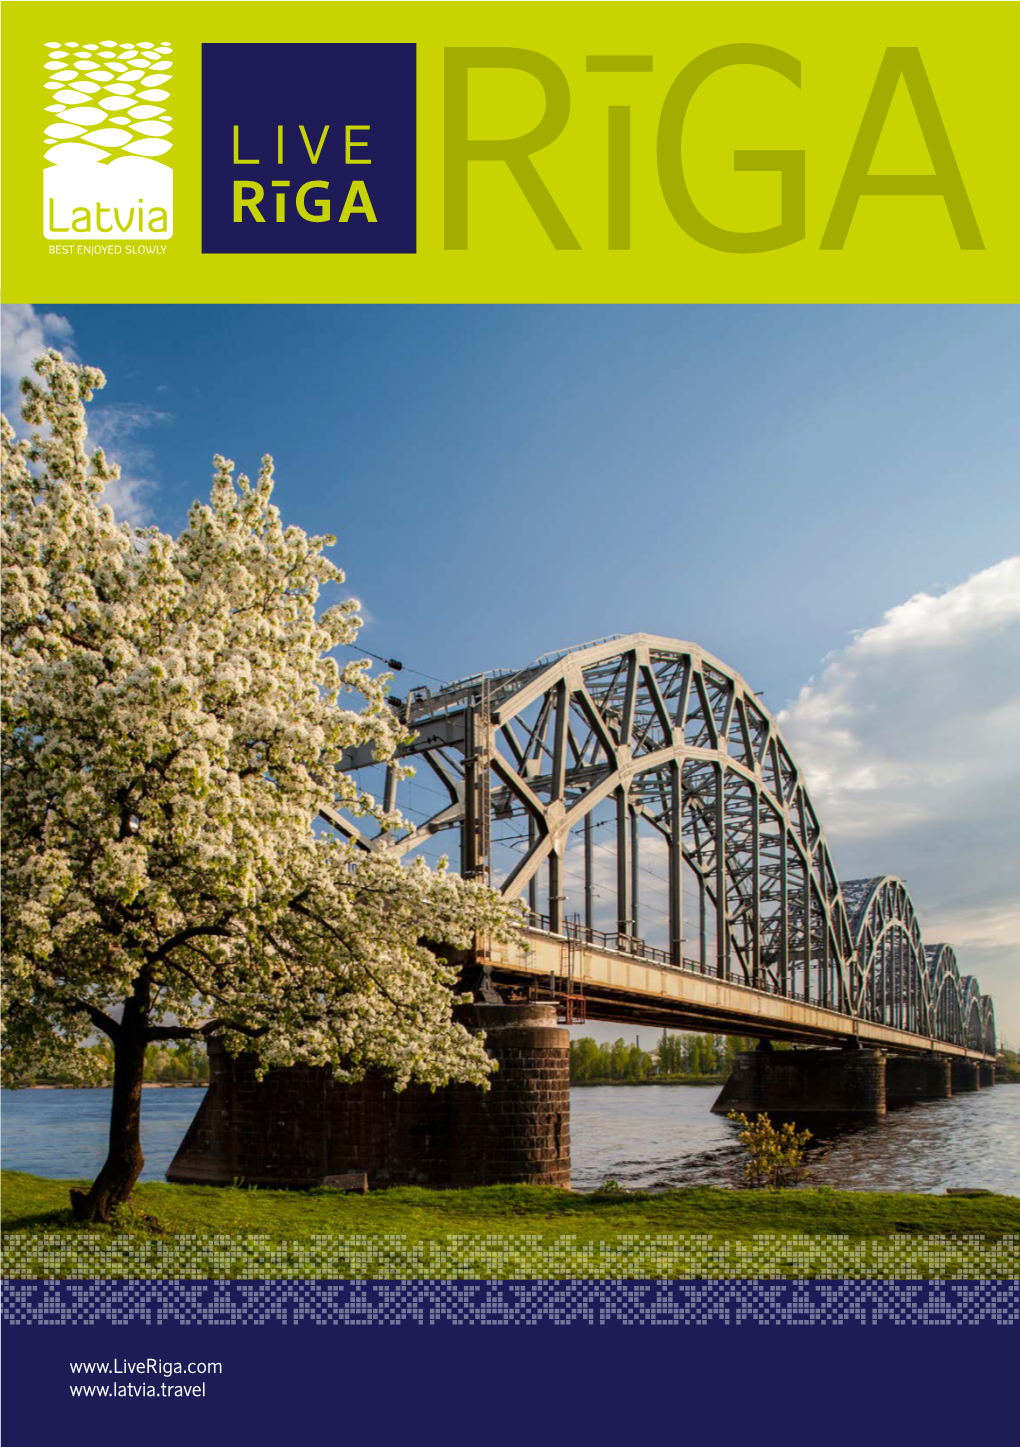 Lived in Riga Europe, Staro Rīga, Takes Place This Year (1837-1839)